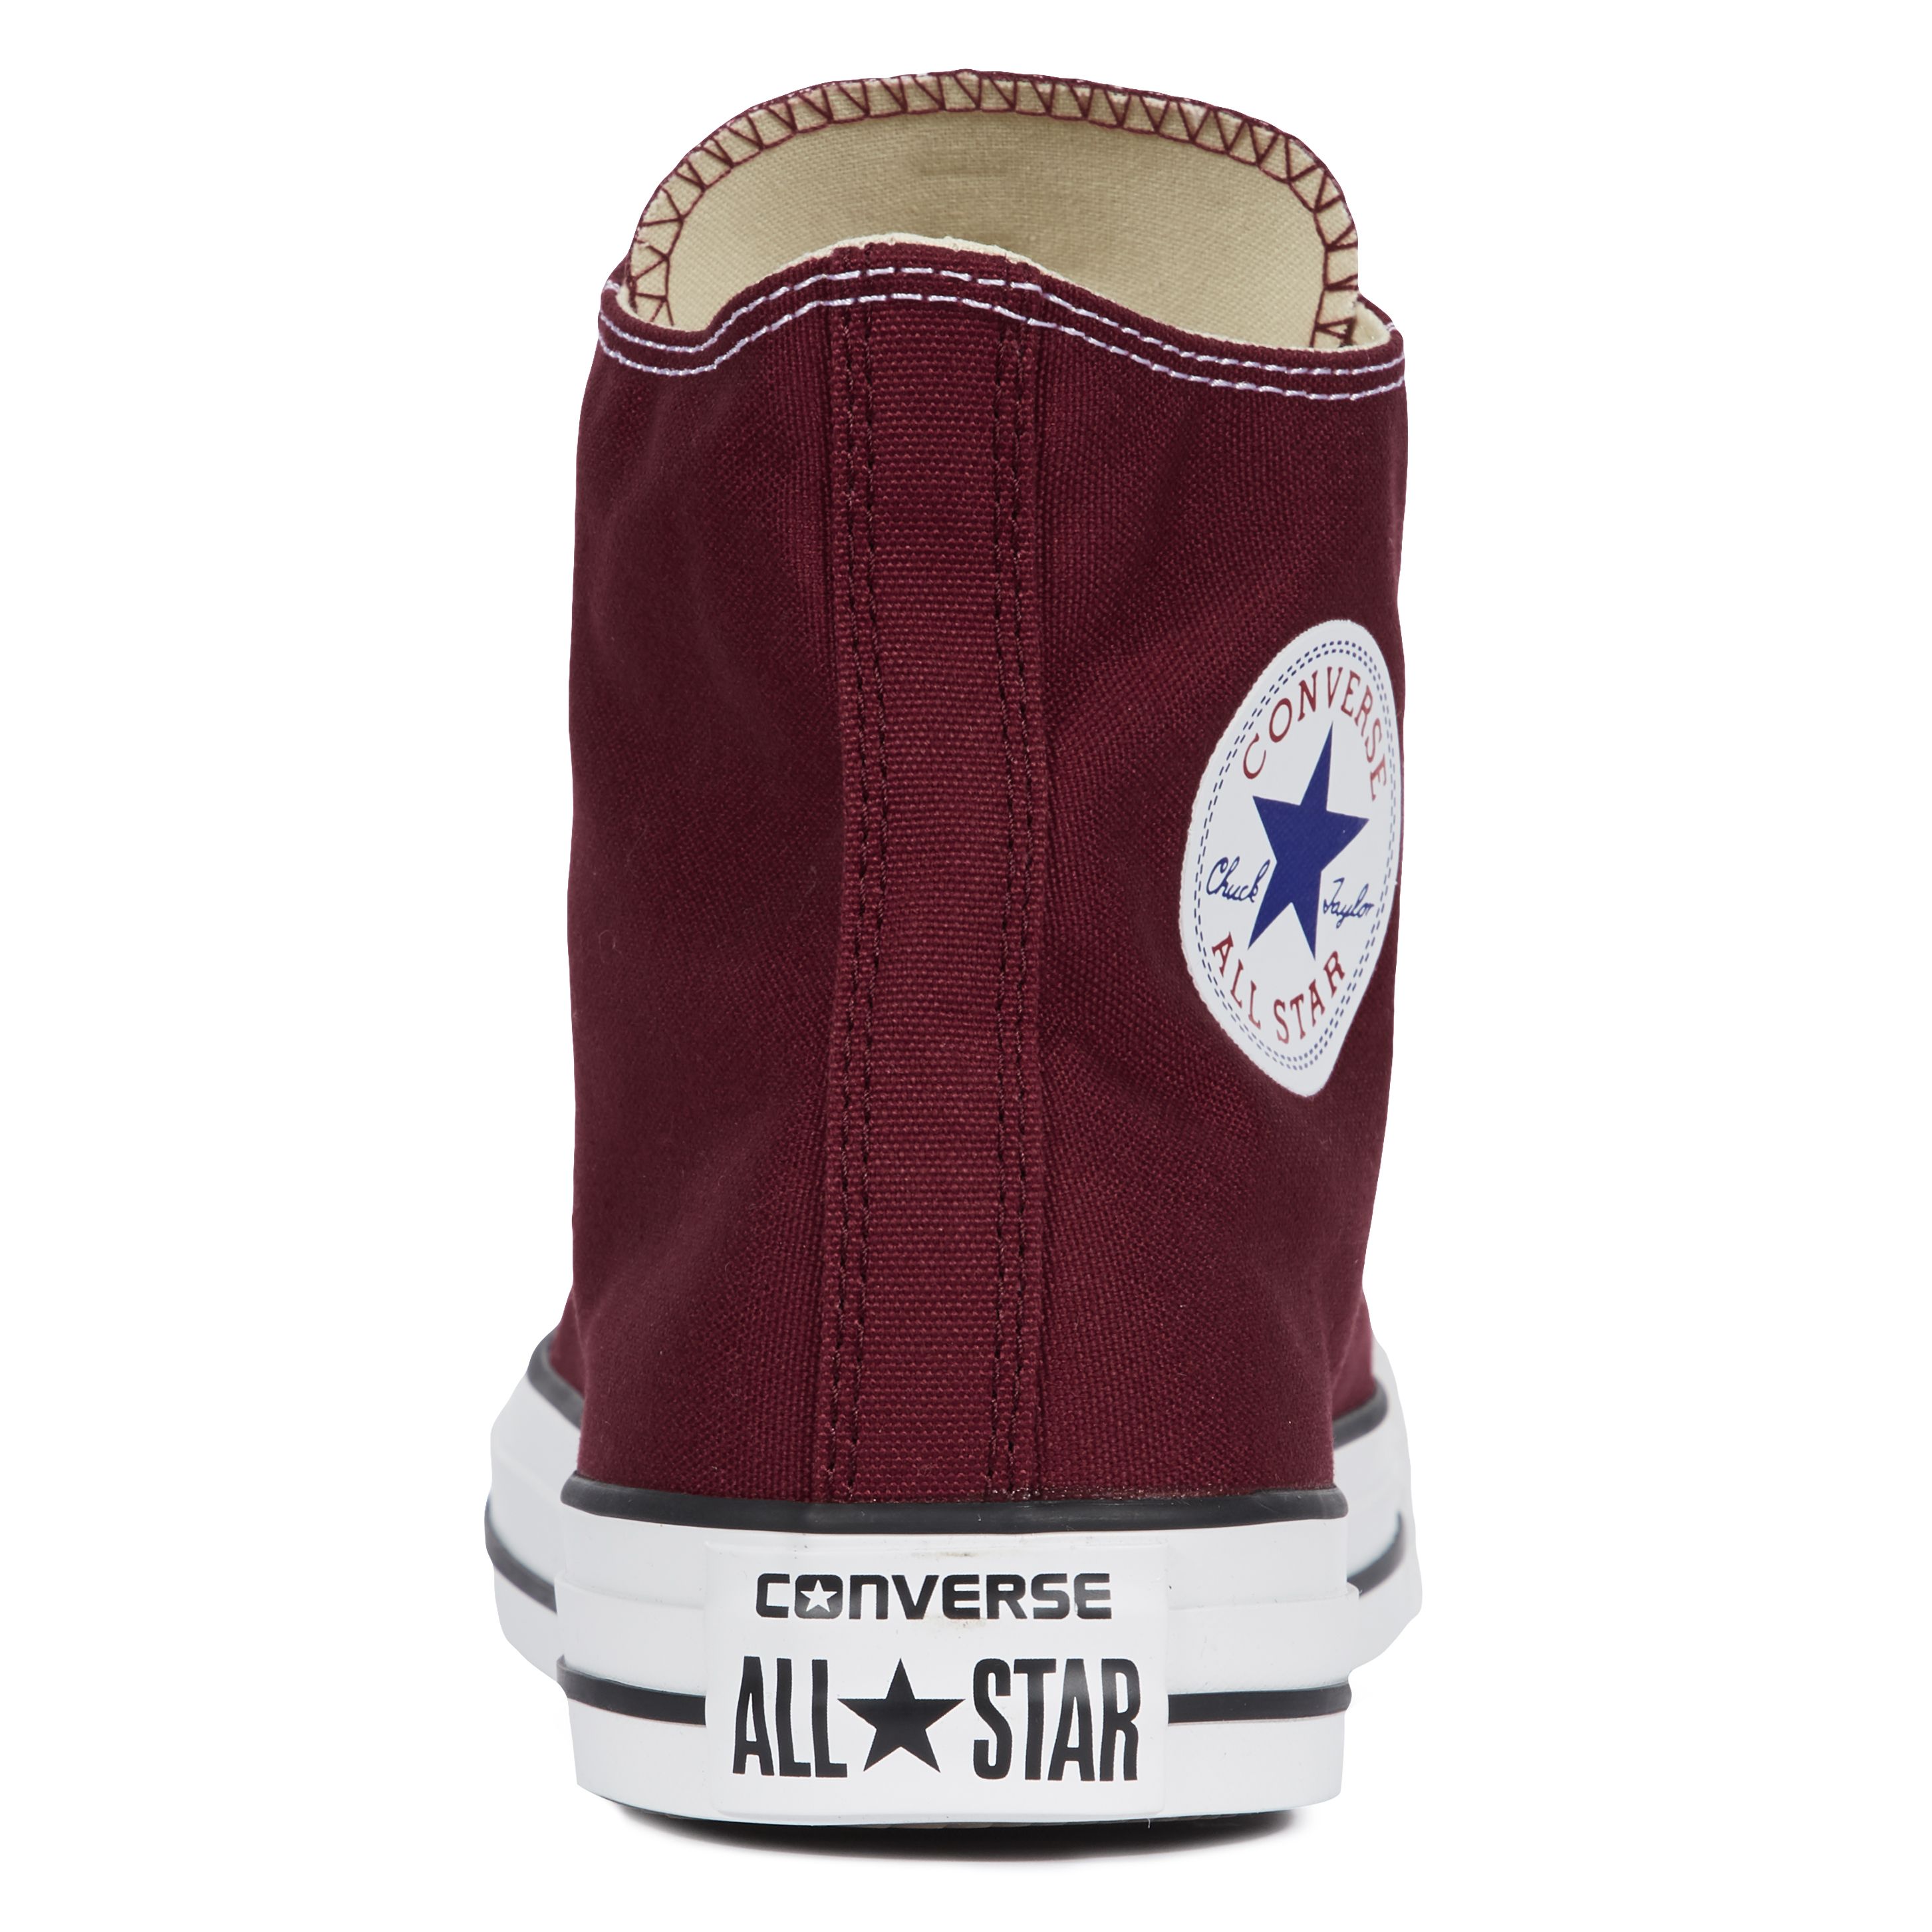 Converse All Star Unisex Chuck Taylor High Top Sneakers - Maroon